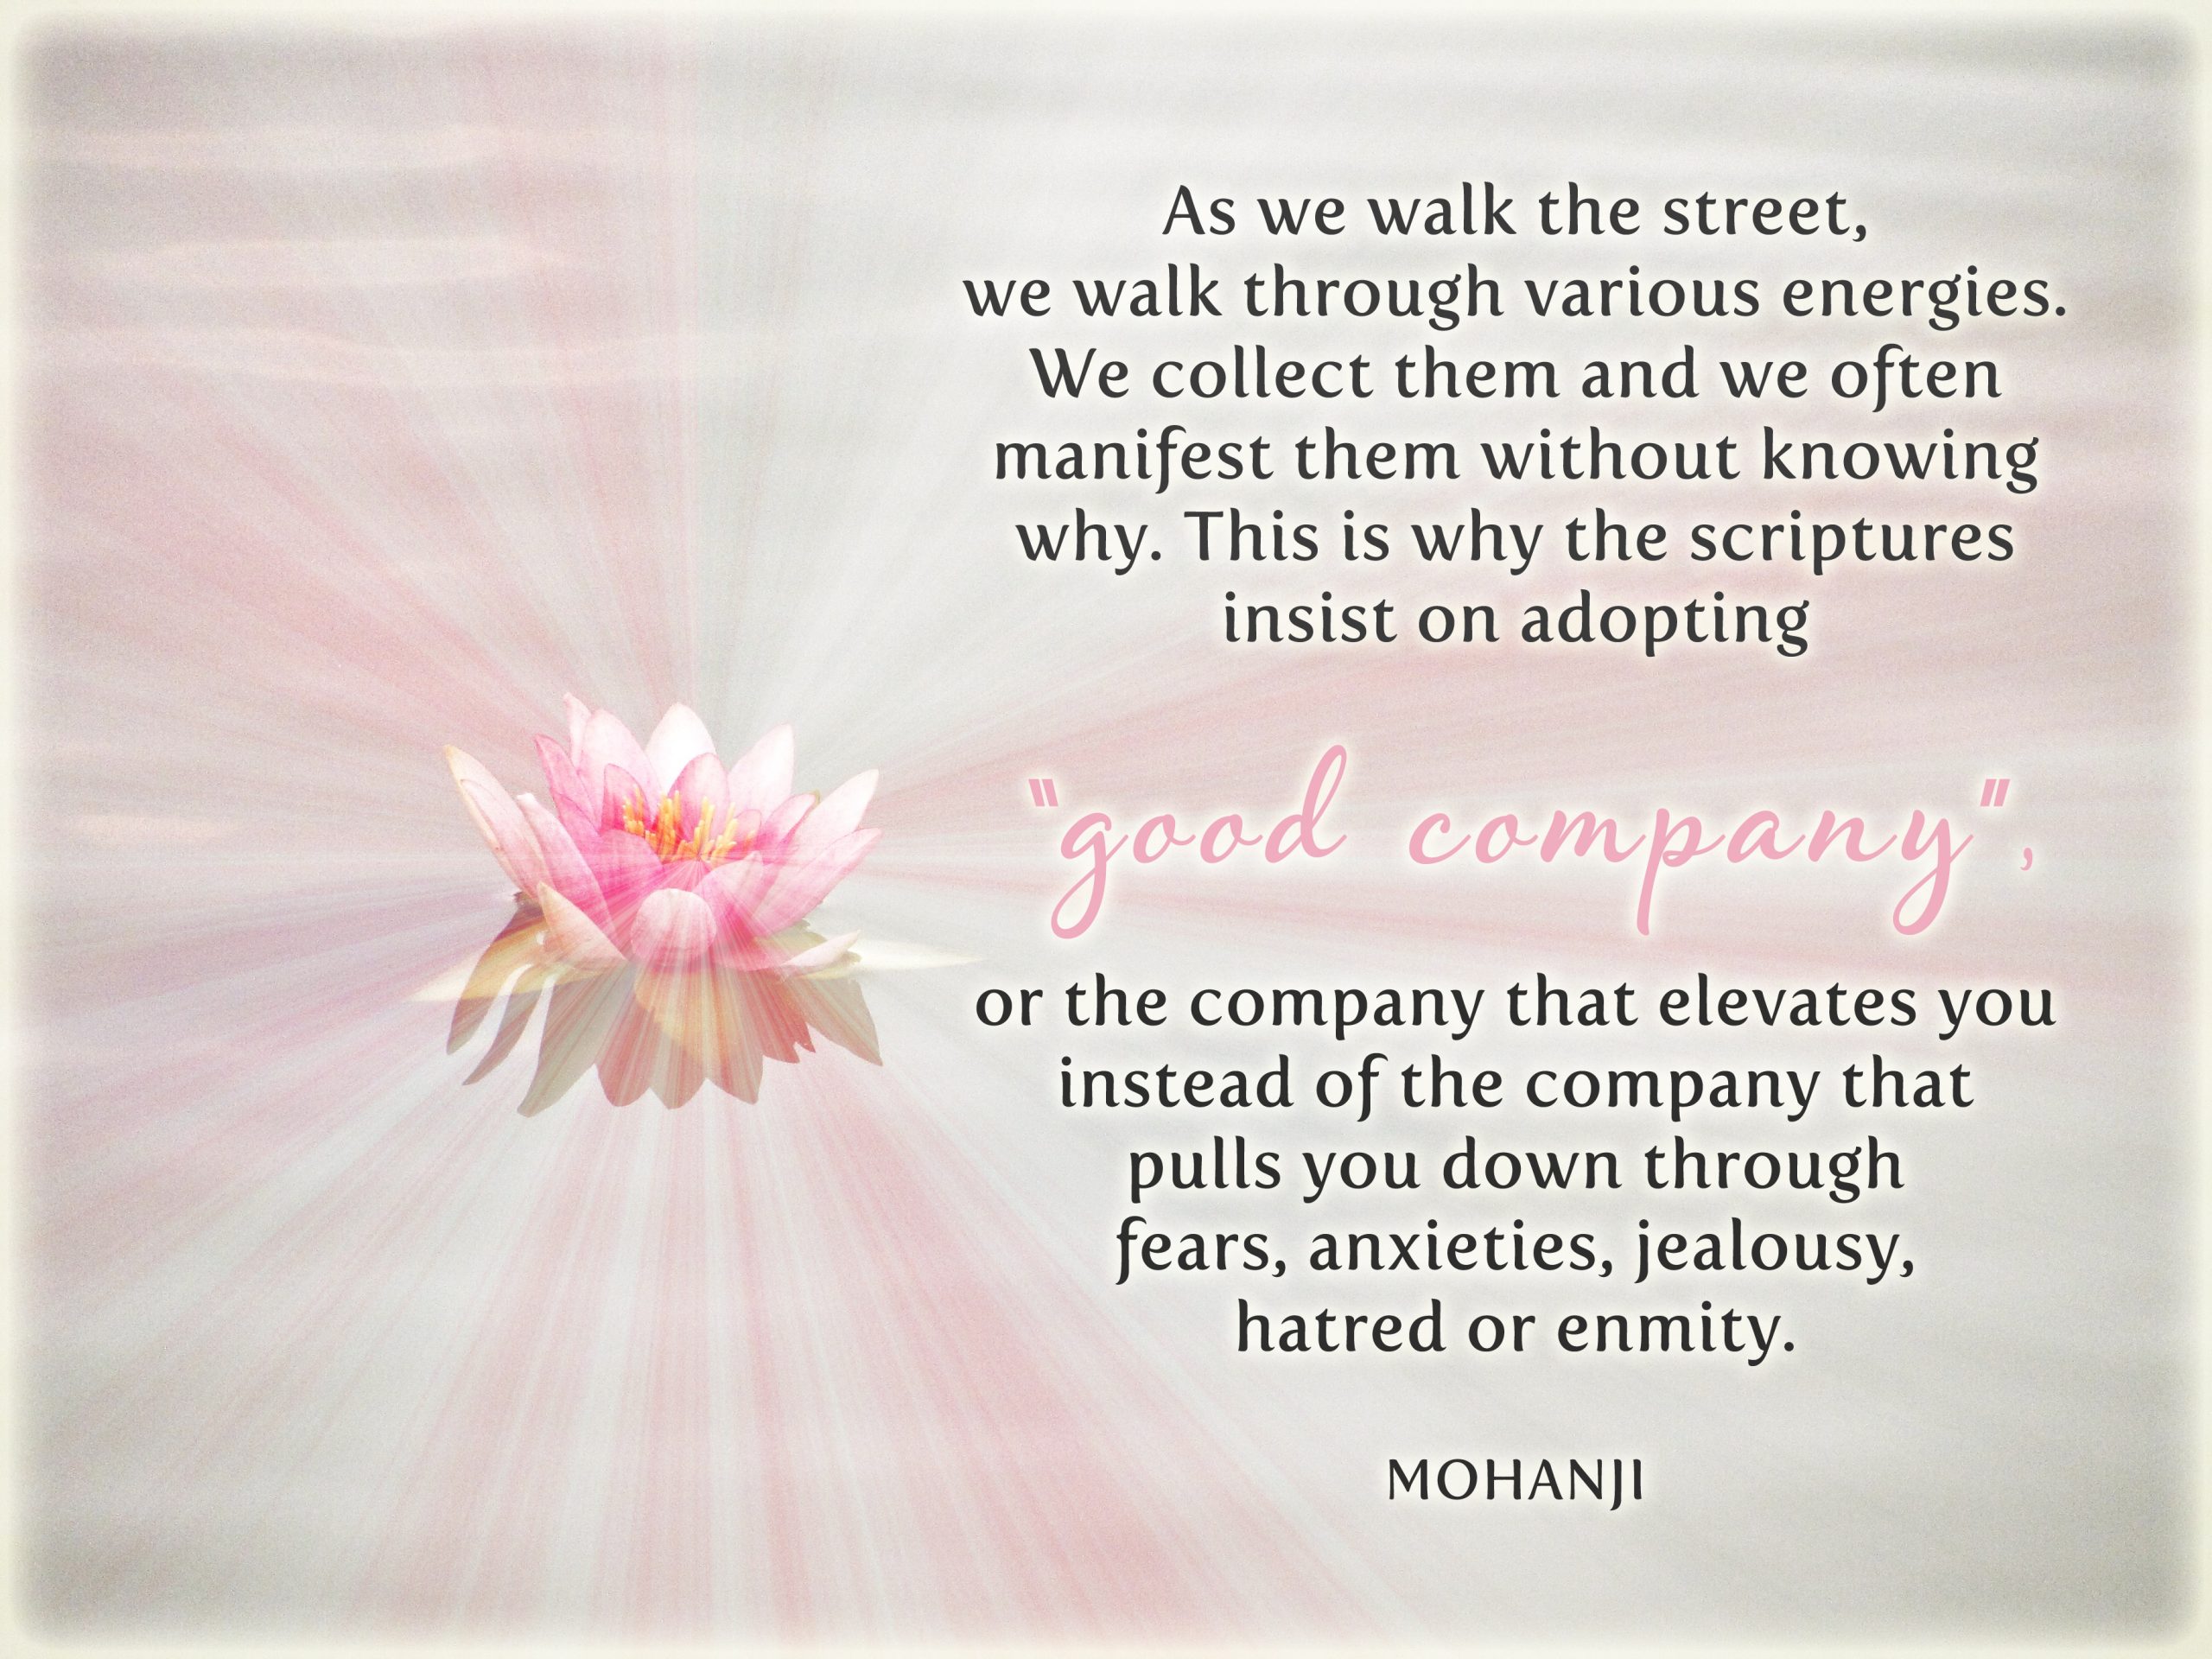 Mohanji quote - As we walk the street